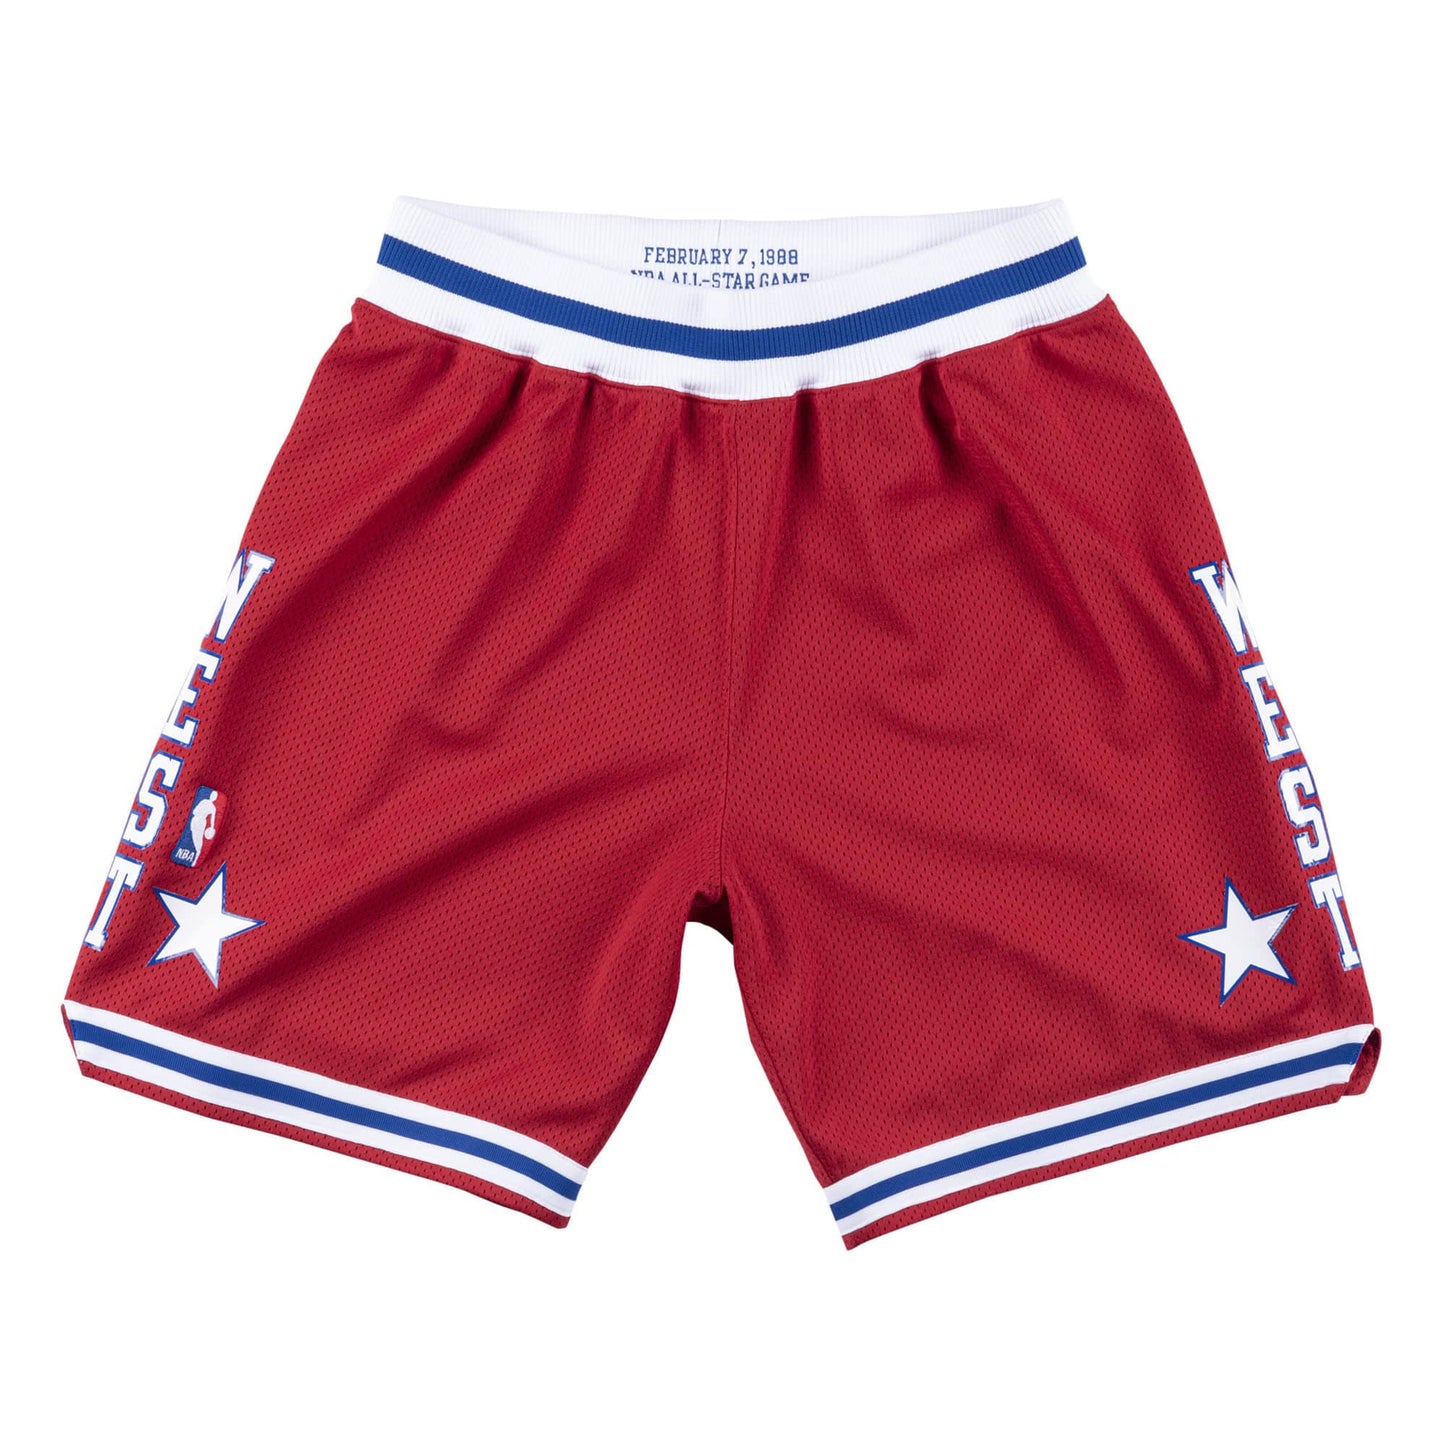 NBA Authentic Shorts All-Star West 1988